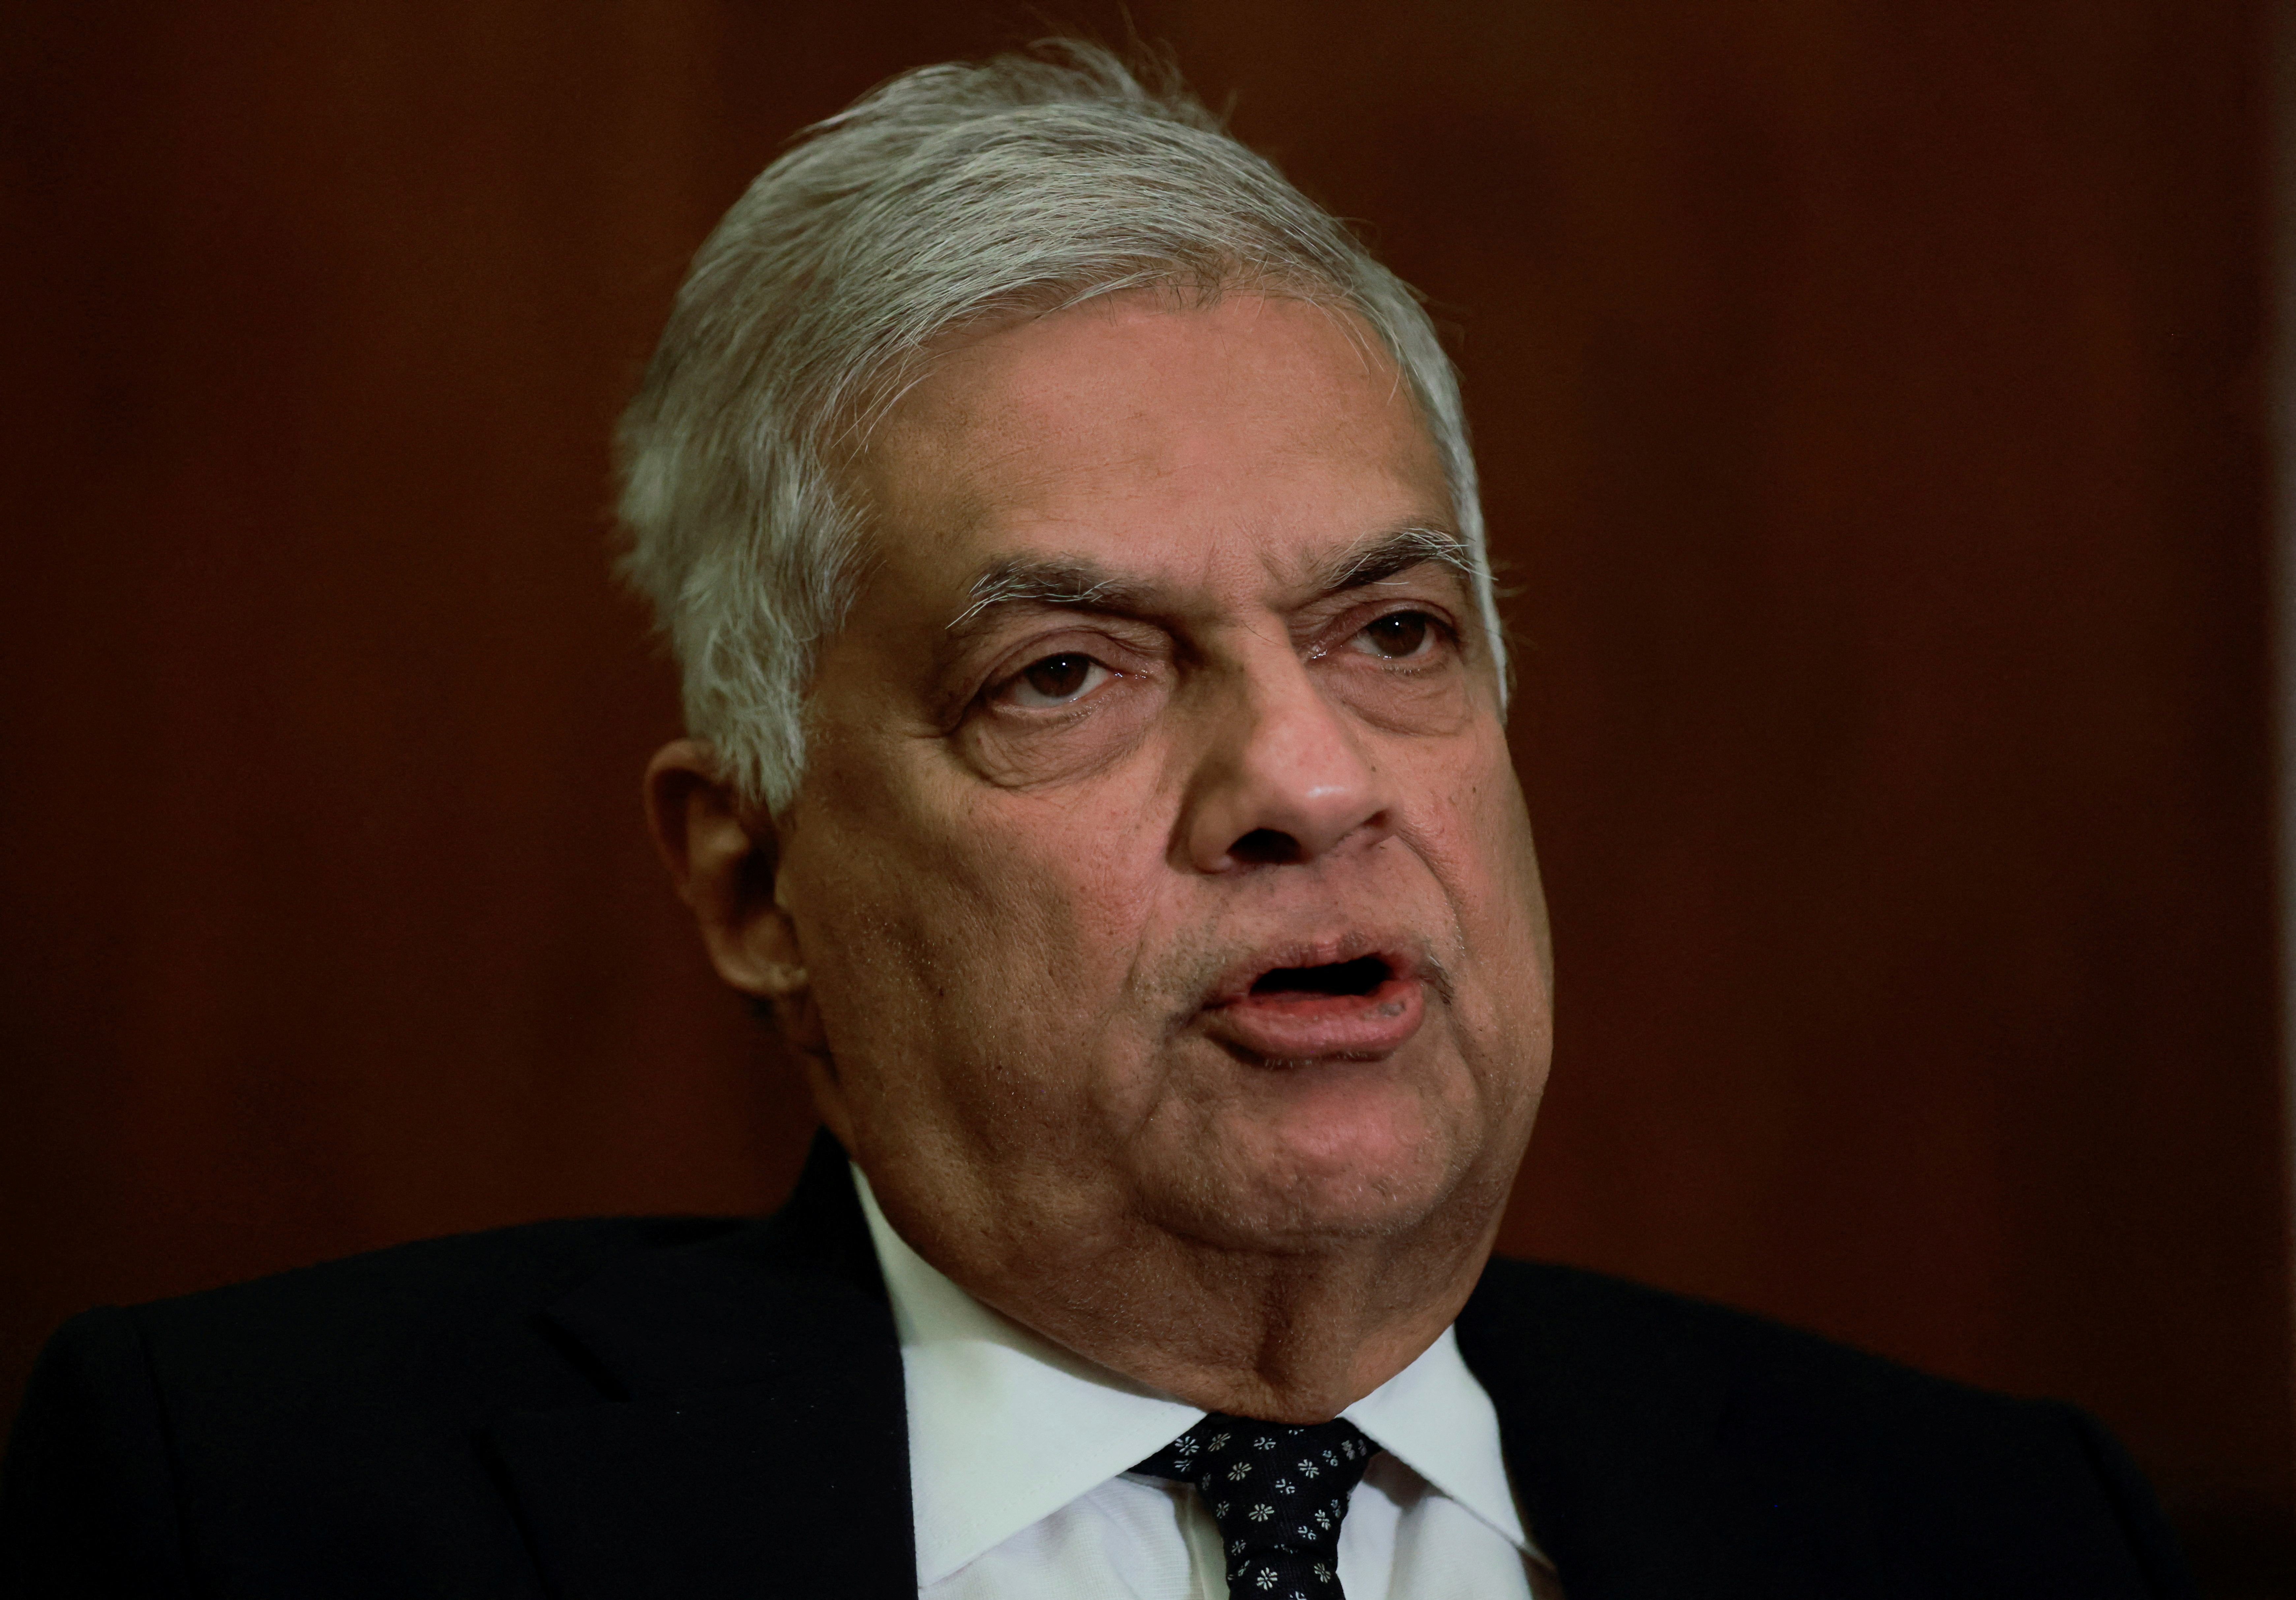 Sri Lanka's President Wickremesinghe attends an interview with Reuters at his office in Colombo